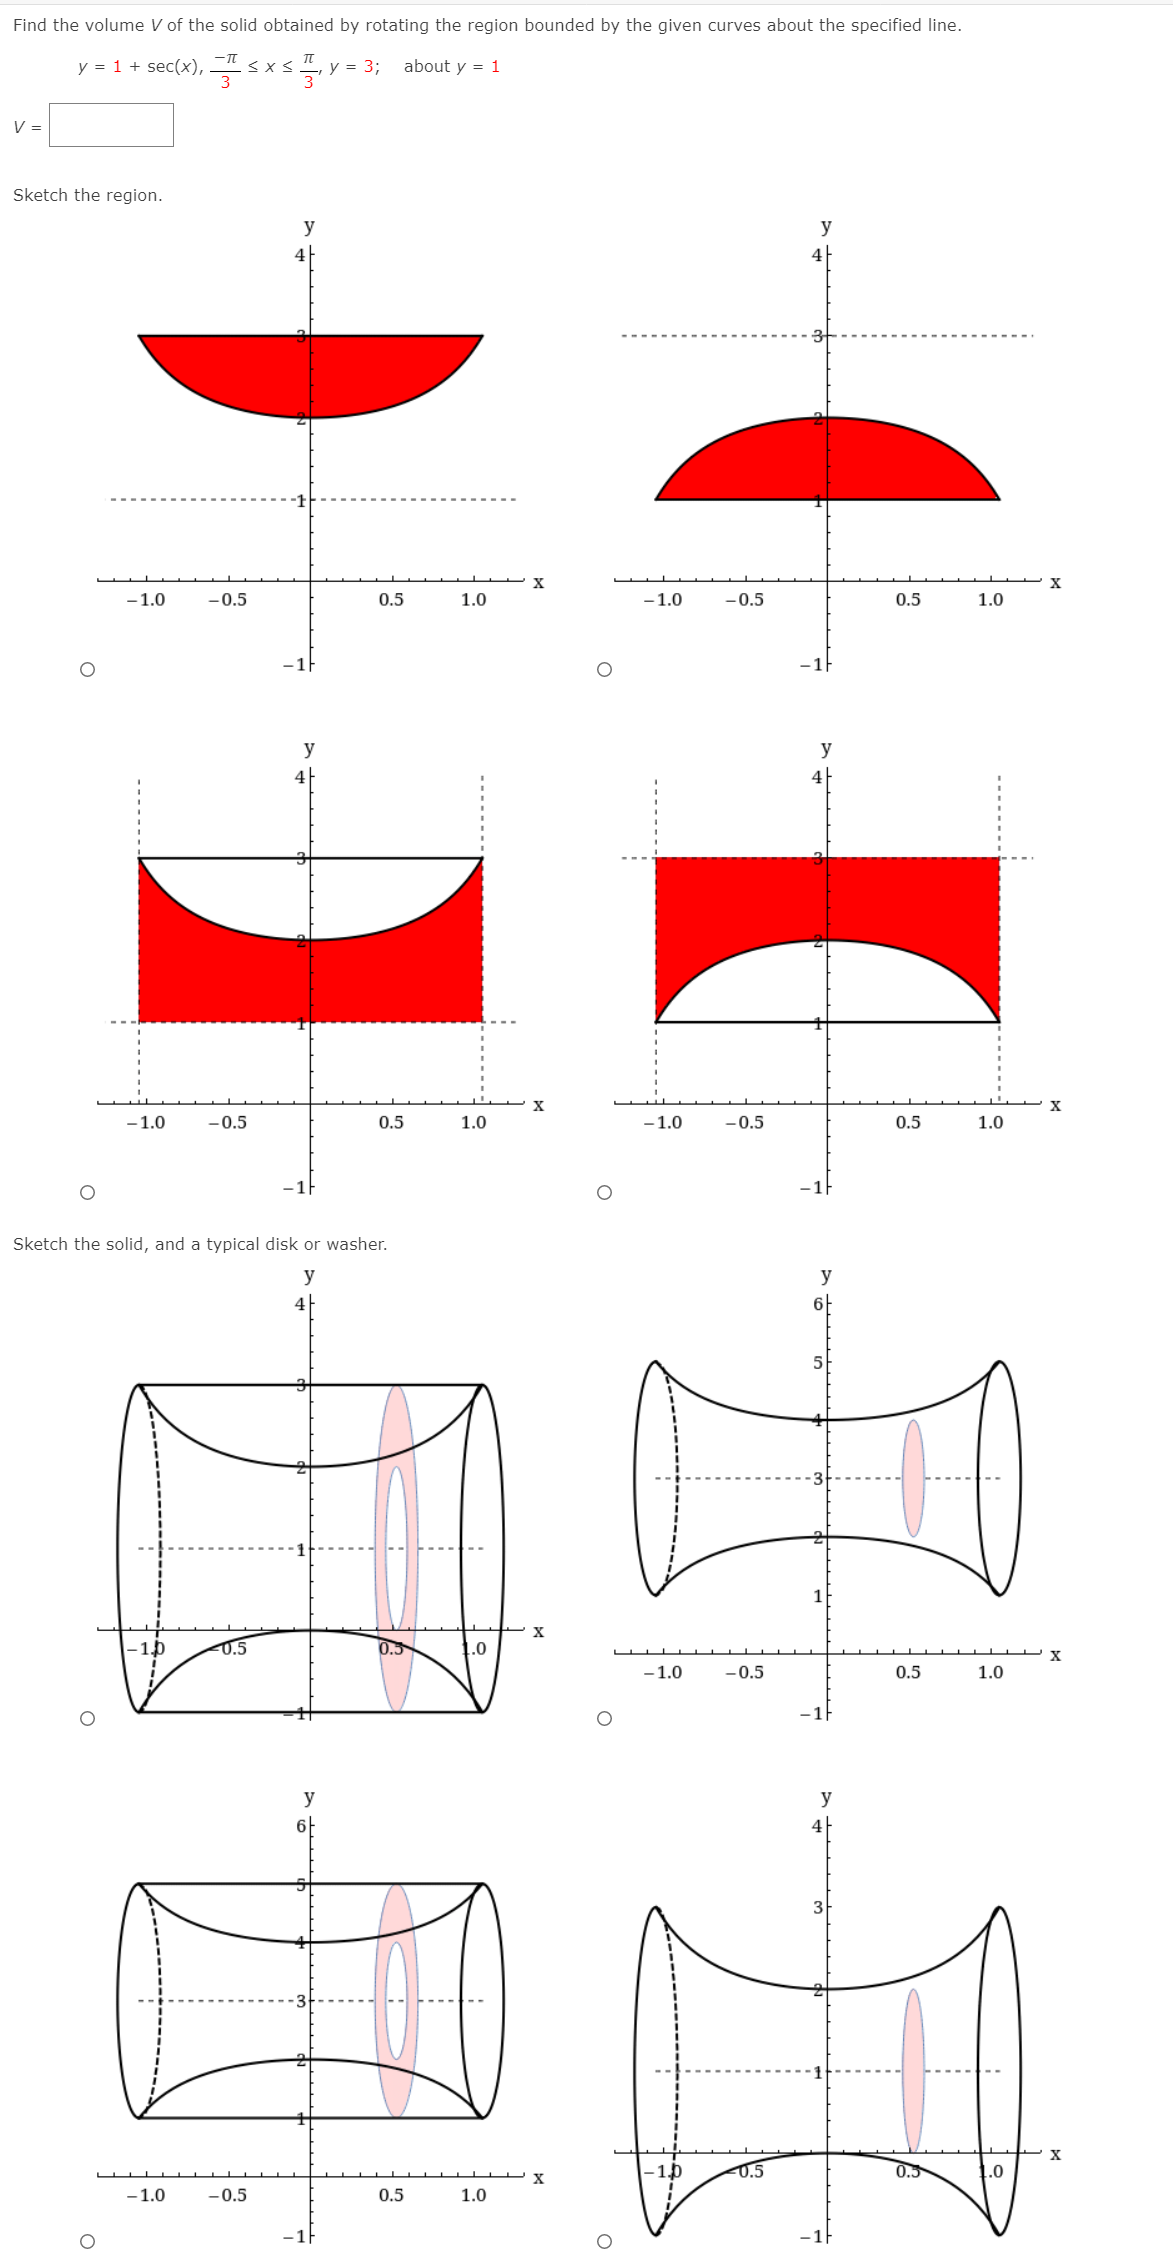 Find the volume V of the solid obtained by rotating the region bounded by the given curves about the specified line.
y = 1 + sec(x), sx
about y = 1
y = 3;
V =
Sketch the region.
y
y
4
-1.0
-0.5
0.5
1.0
-1.0
-0.5
0.5
1.0
-1
-1}
y
y
4
4|
-1.0
-0.5
0.5
1.0
-1.0
-0.5
0.5
1.0
-1F
Sketch the solid, and a typical disk or washer.
y
y
4
6-
5
1
X
-1.0
0.5
0.5
.0
X
-1.0
-0.5
0.5
1.0
-1|
y
y
4
-0.5
0.5
1.0
-1.0
-0.5
0.5
1.0
